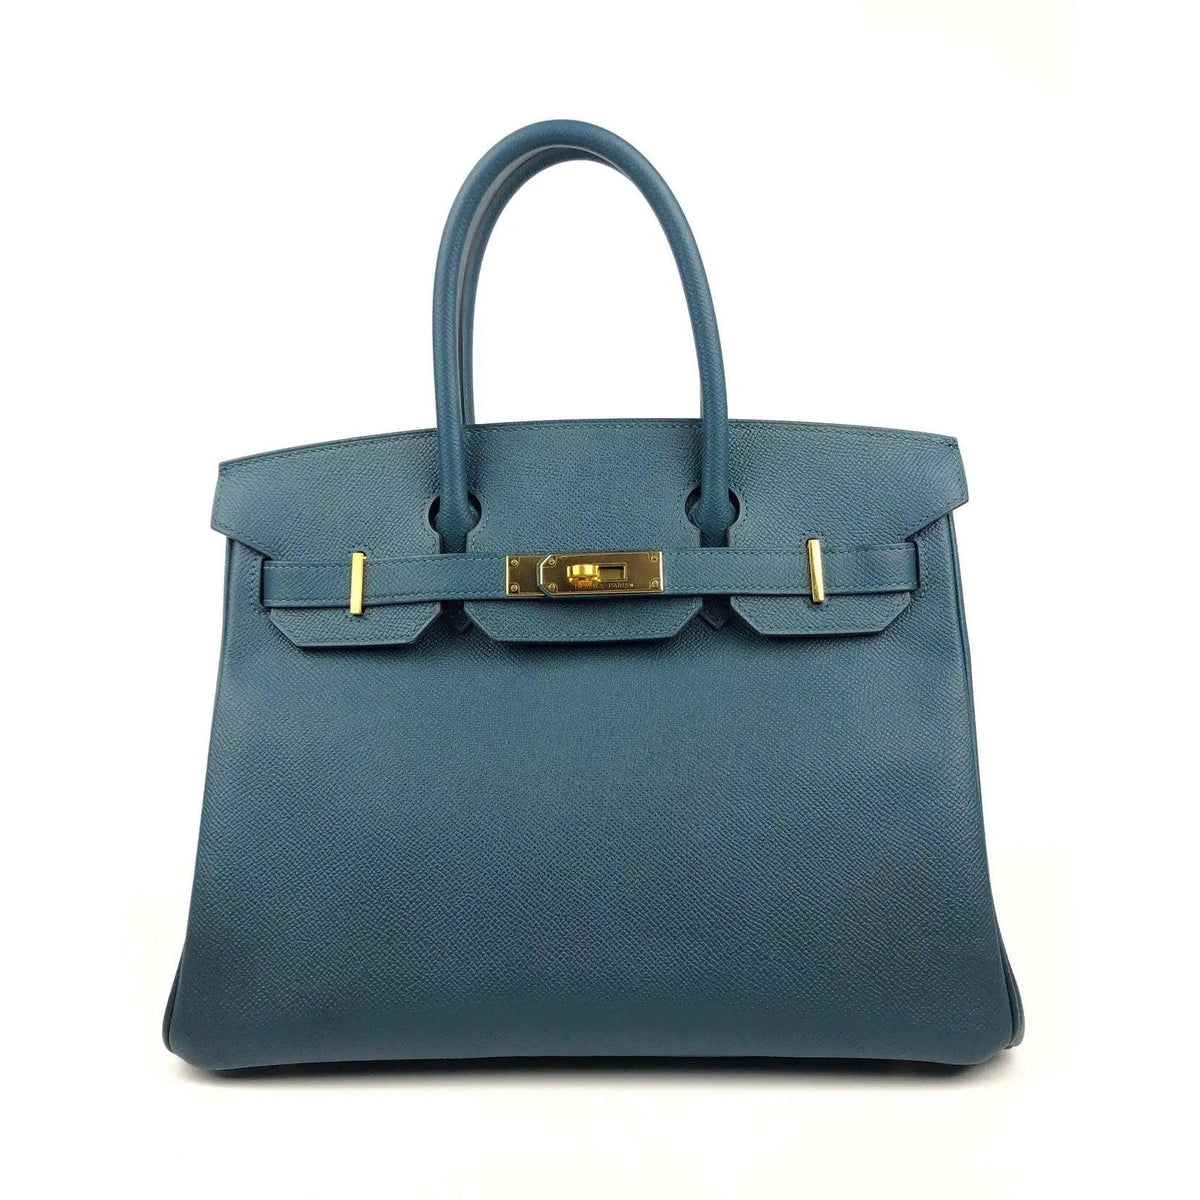 Hermes Birkin 30 Outfit - 1,585 For Sale on 1stDibs